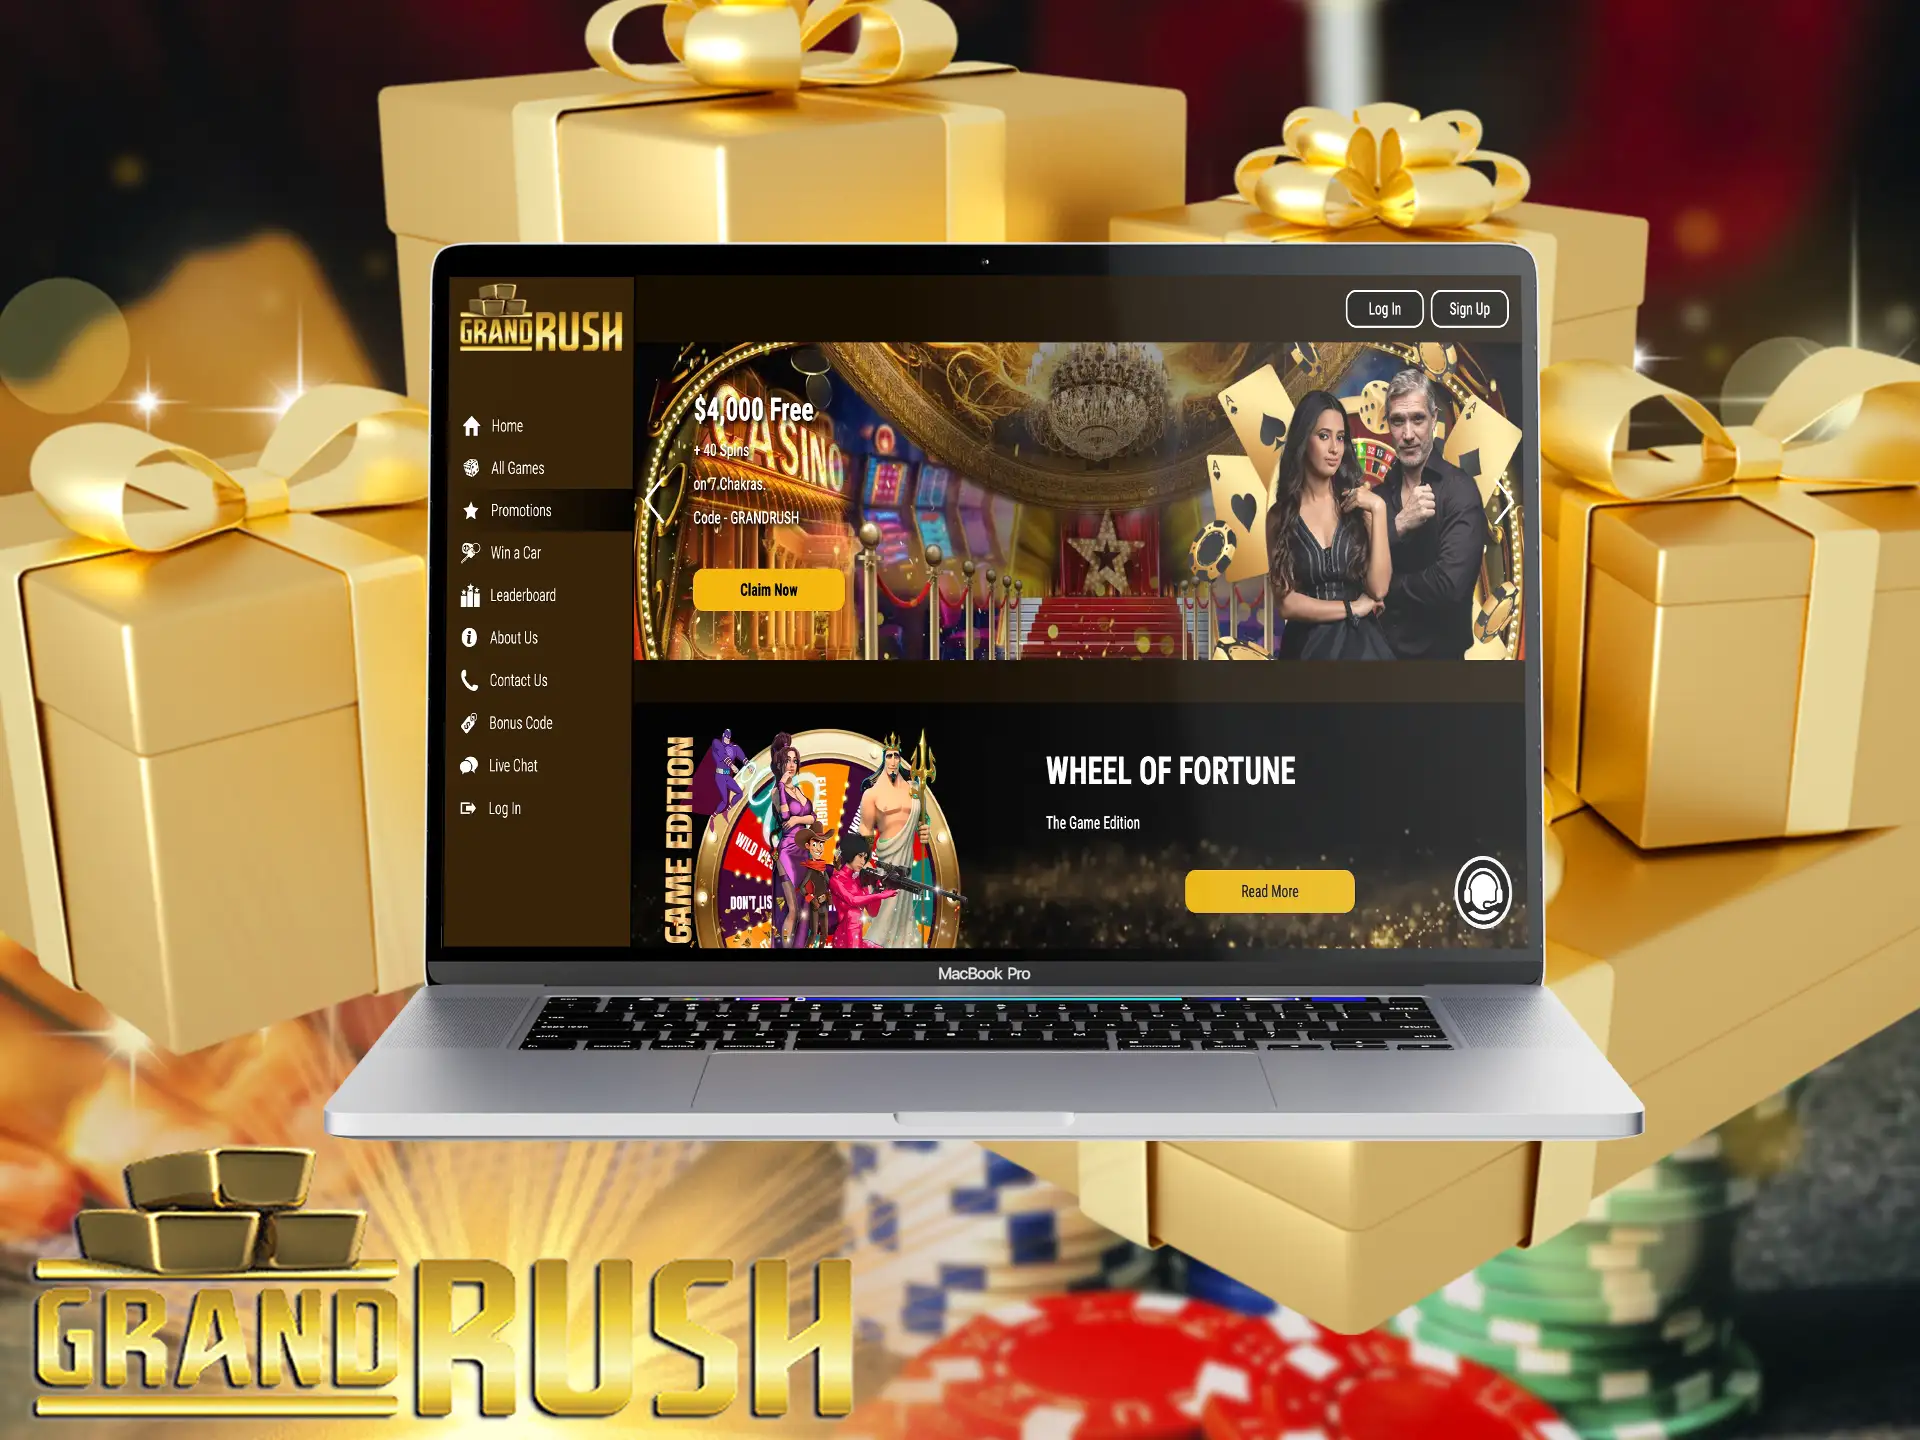 Find out what bonuses players can get with Grand Rush bonus codes.